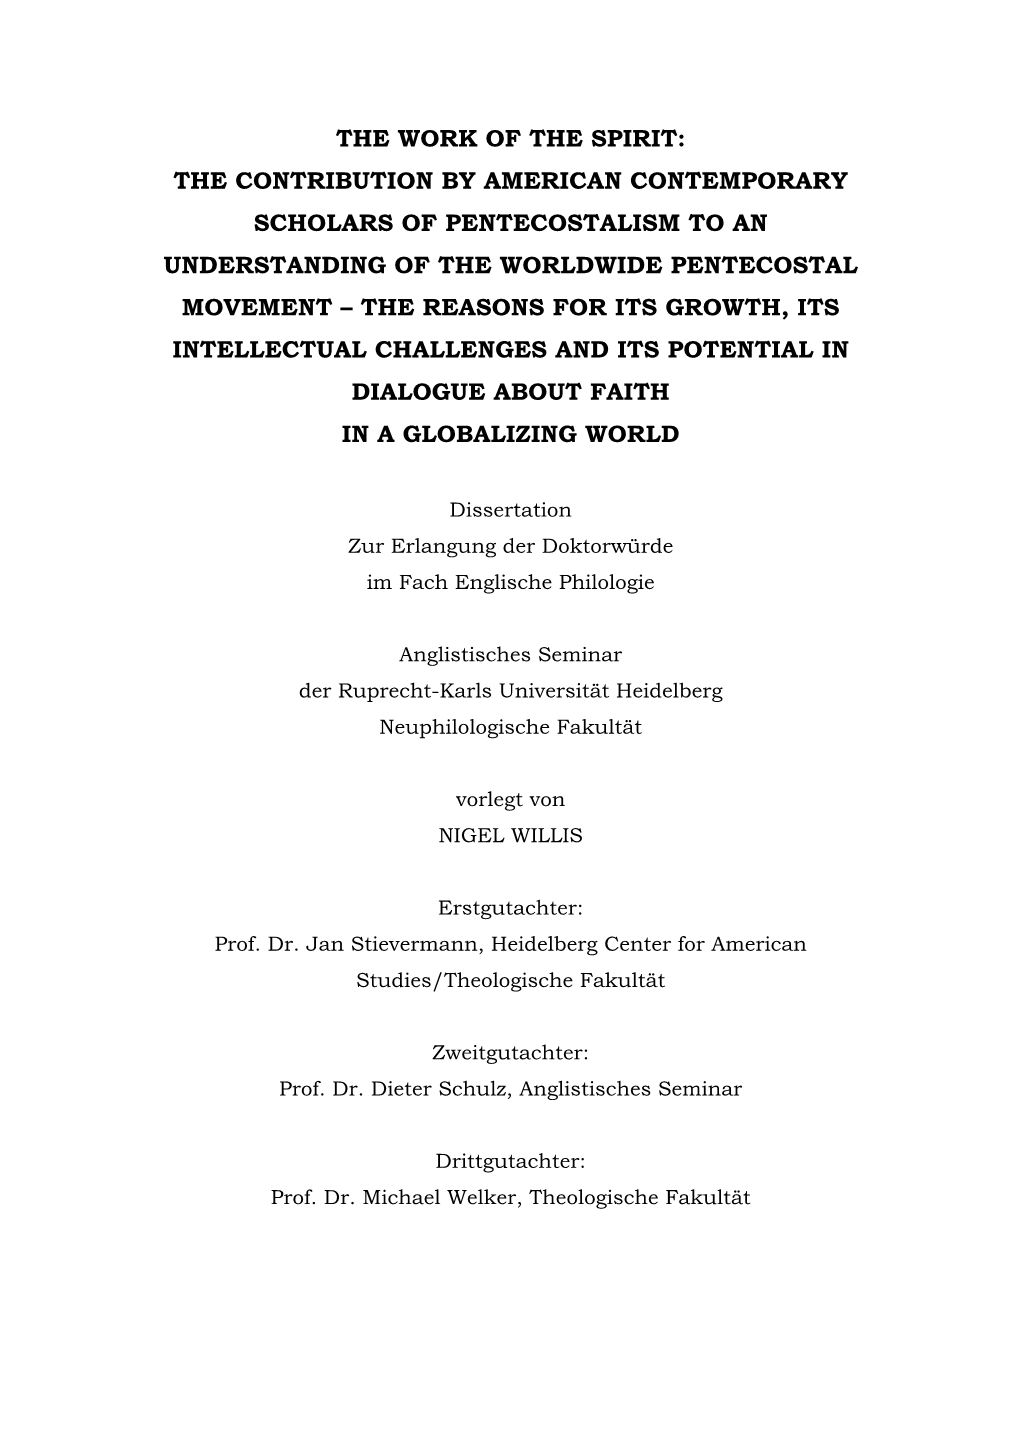 The Work of the Spirit: the Contribution by American Contemporary Scholars of Pentecostalism to an Understanding of the Worldwid